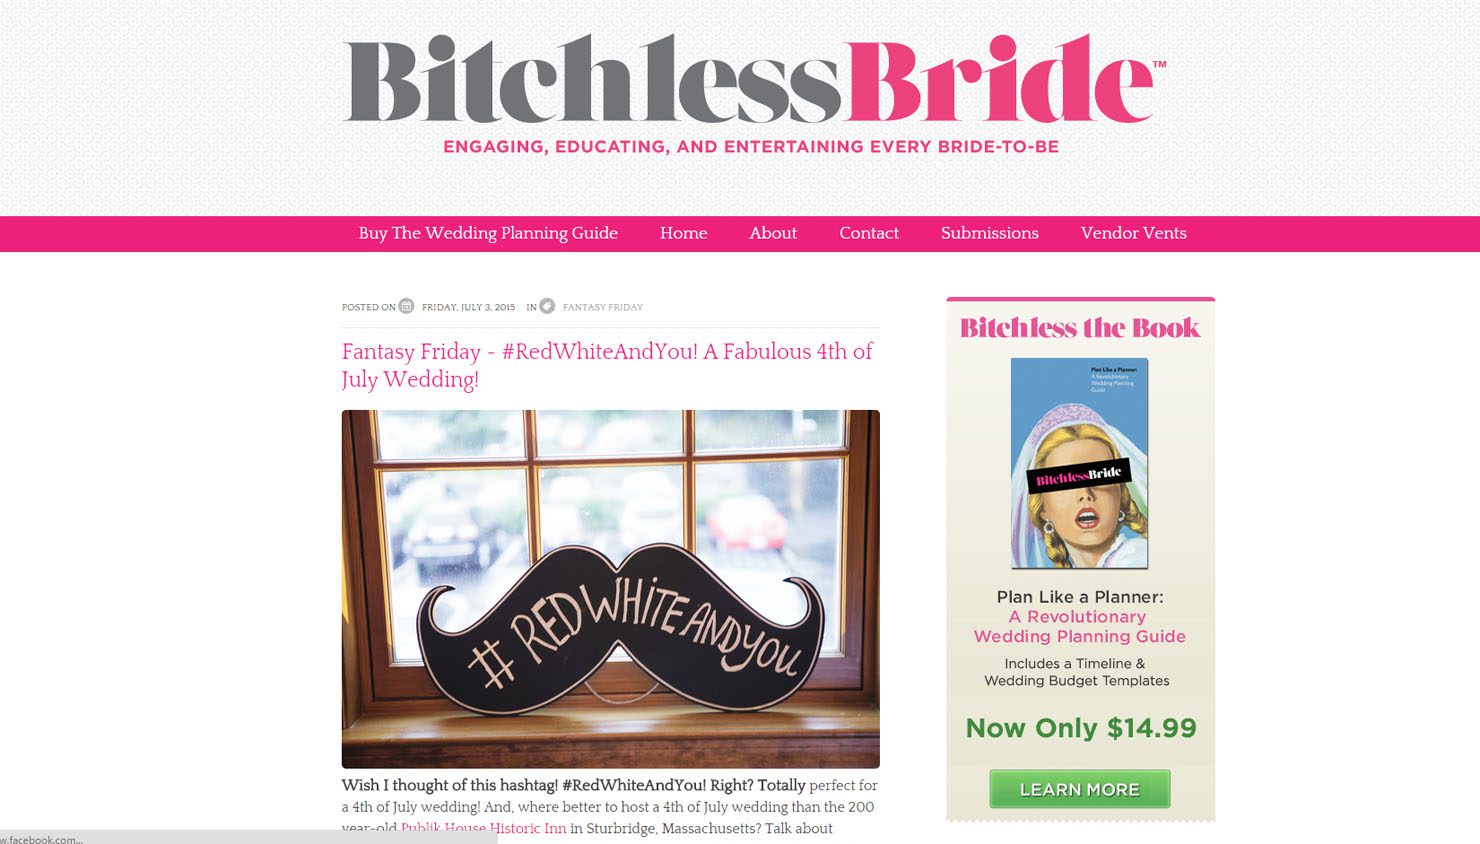 July 4th wedding featured on Bitchless Bride